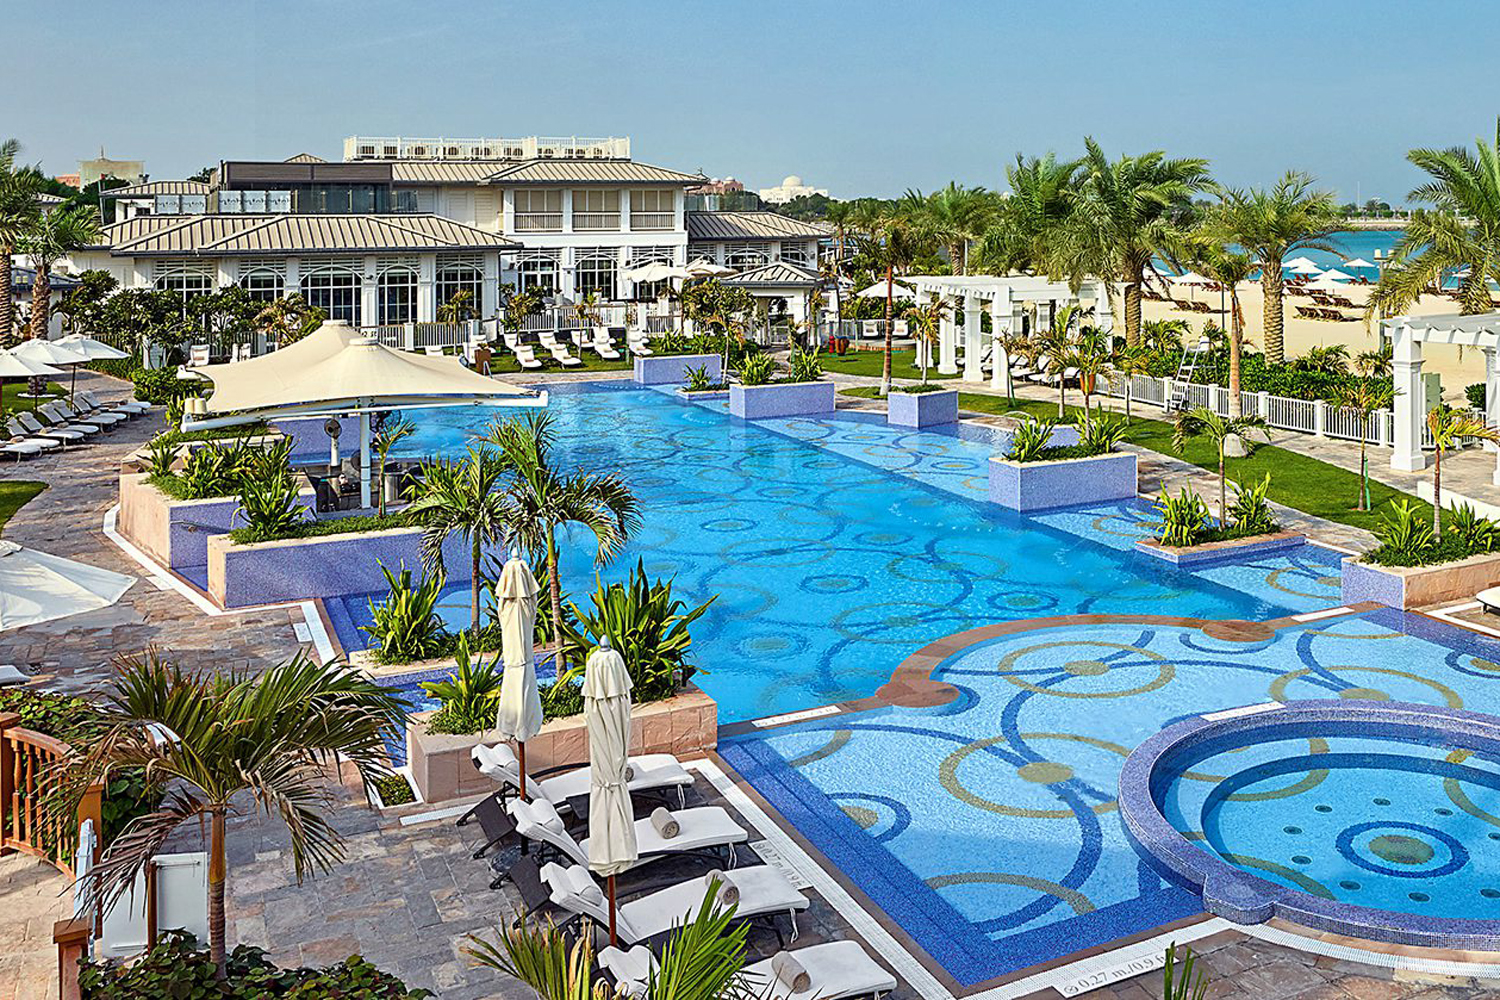 Nation Riviera Beach Club - top attractions in abu dhabi